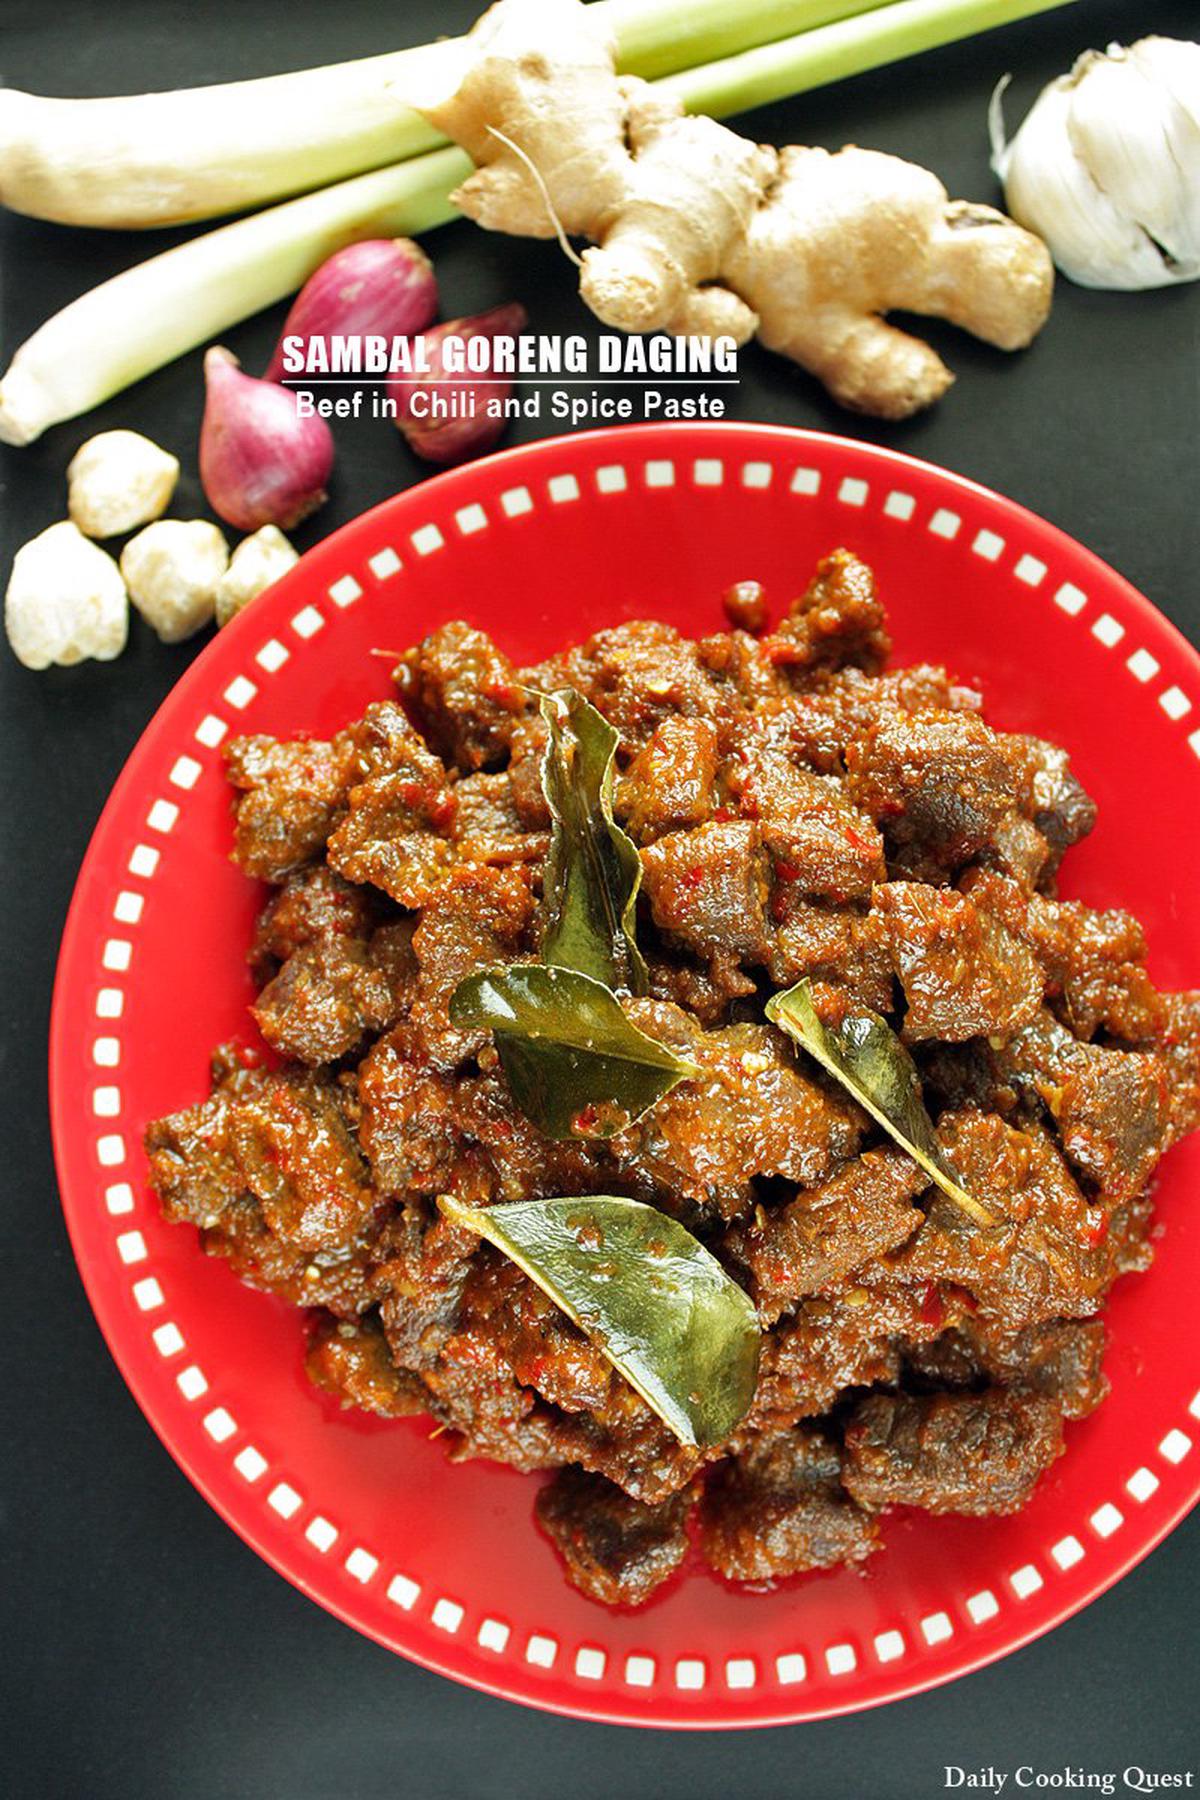 Sambal Goreng Daging - Beef in Chili and Spice Paste